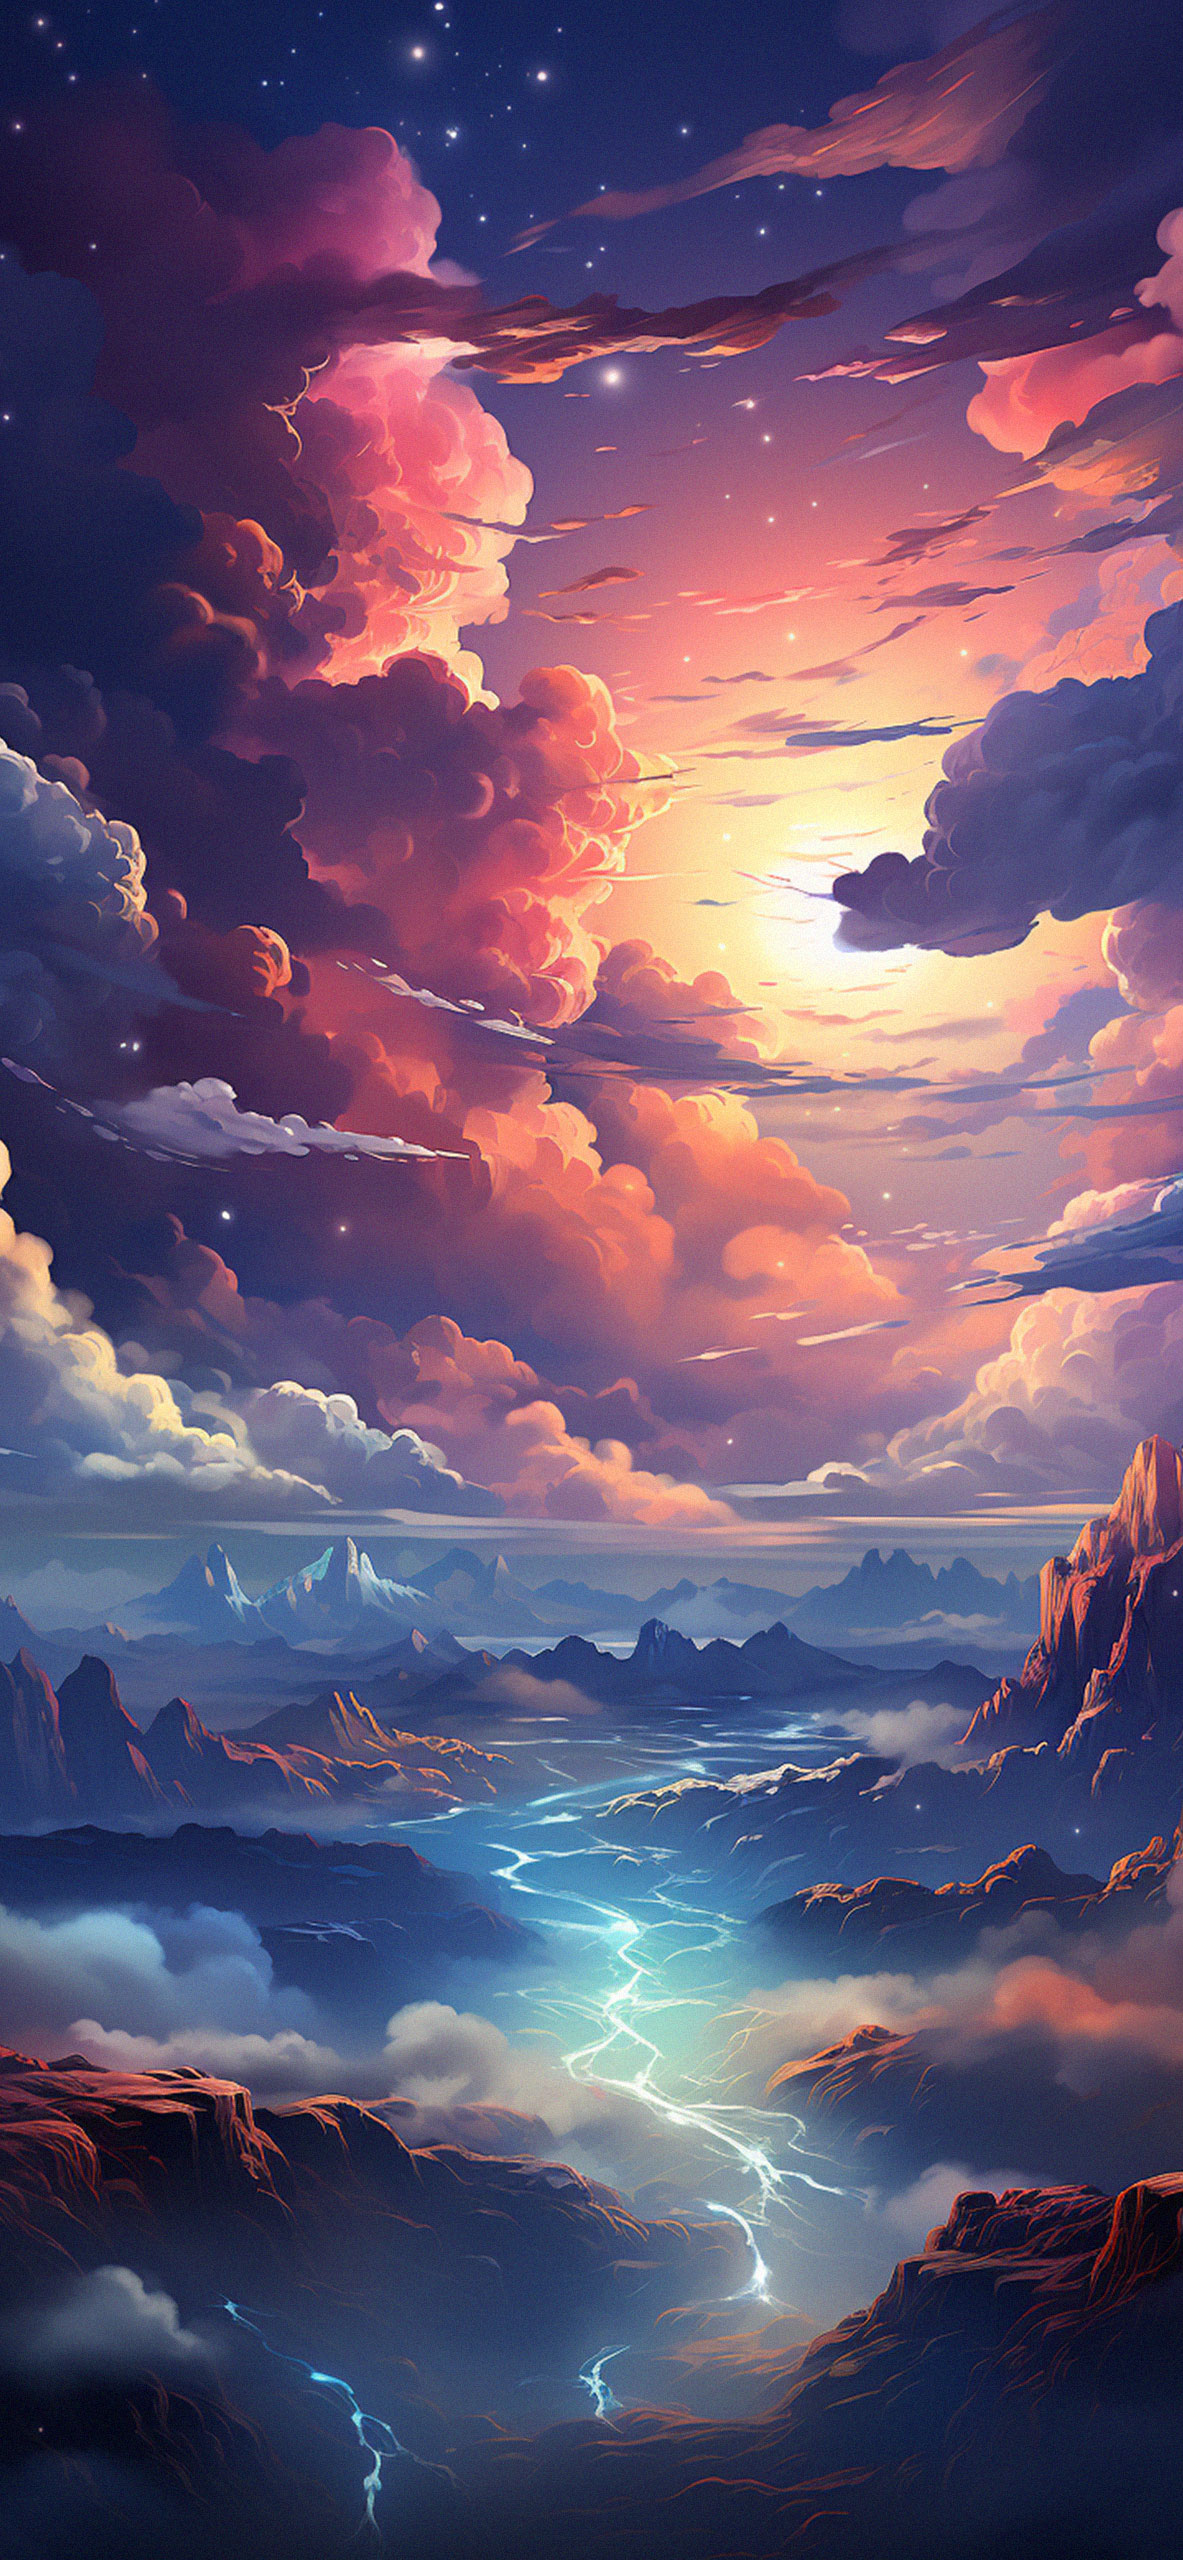 Fantasy Landscape, Beautiful Scenery, Digital Illustration, Wallpaper Or  Background Stock Photo, Picture and Royalty Free Image. Image 194900010.